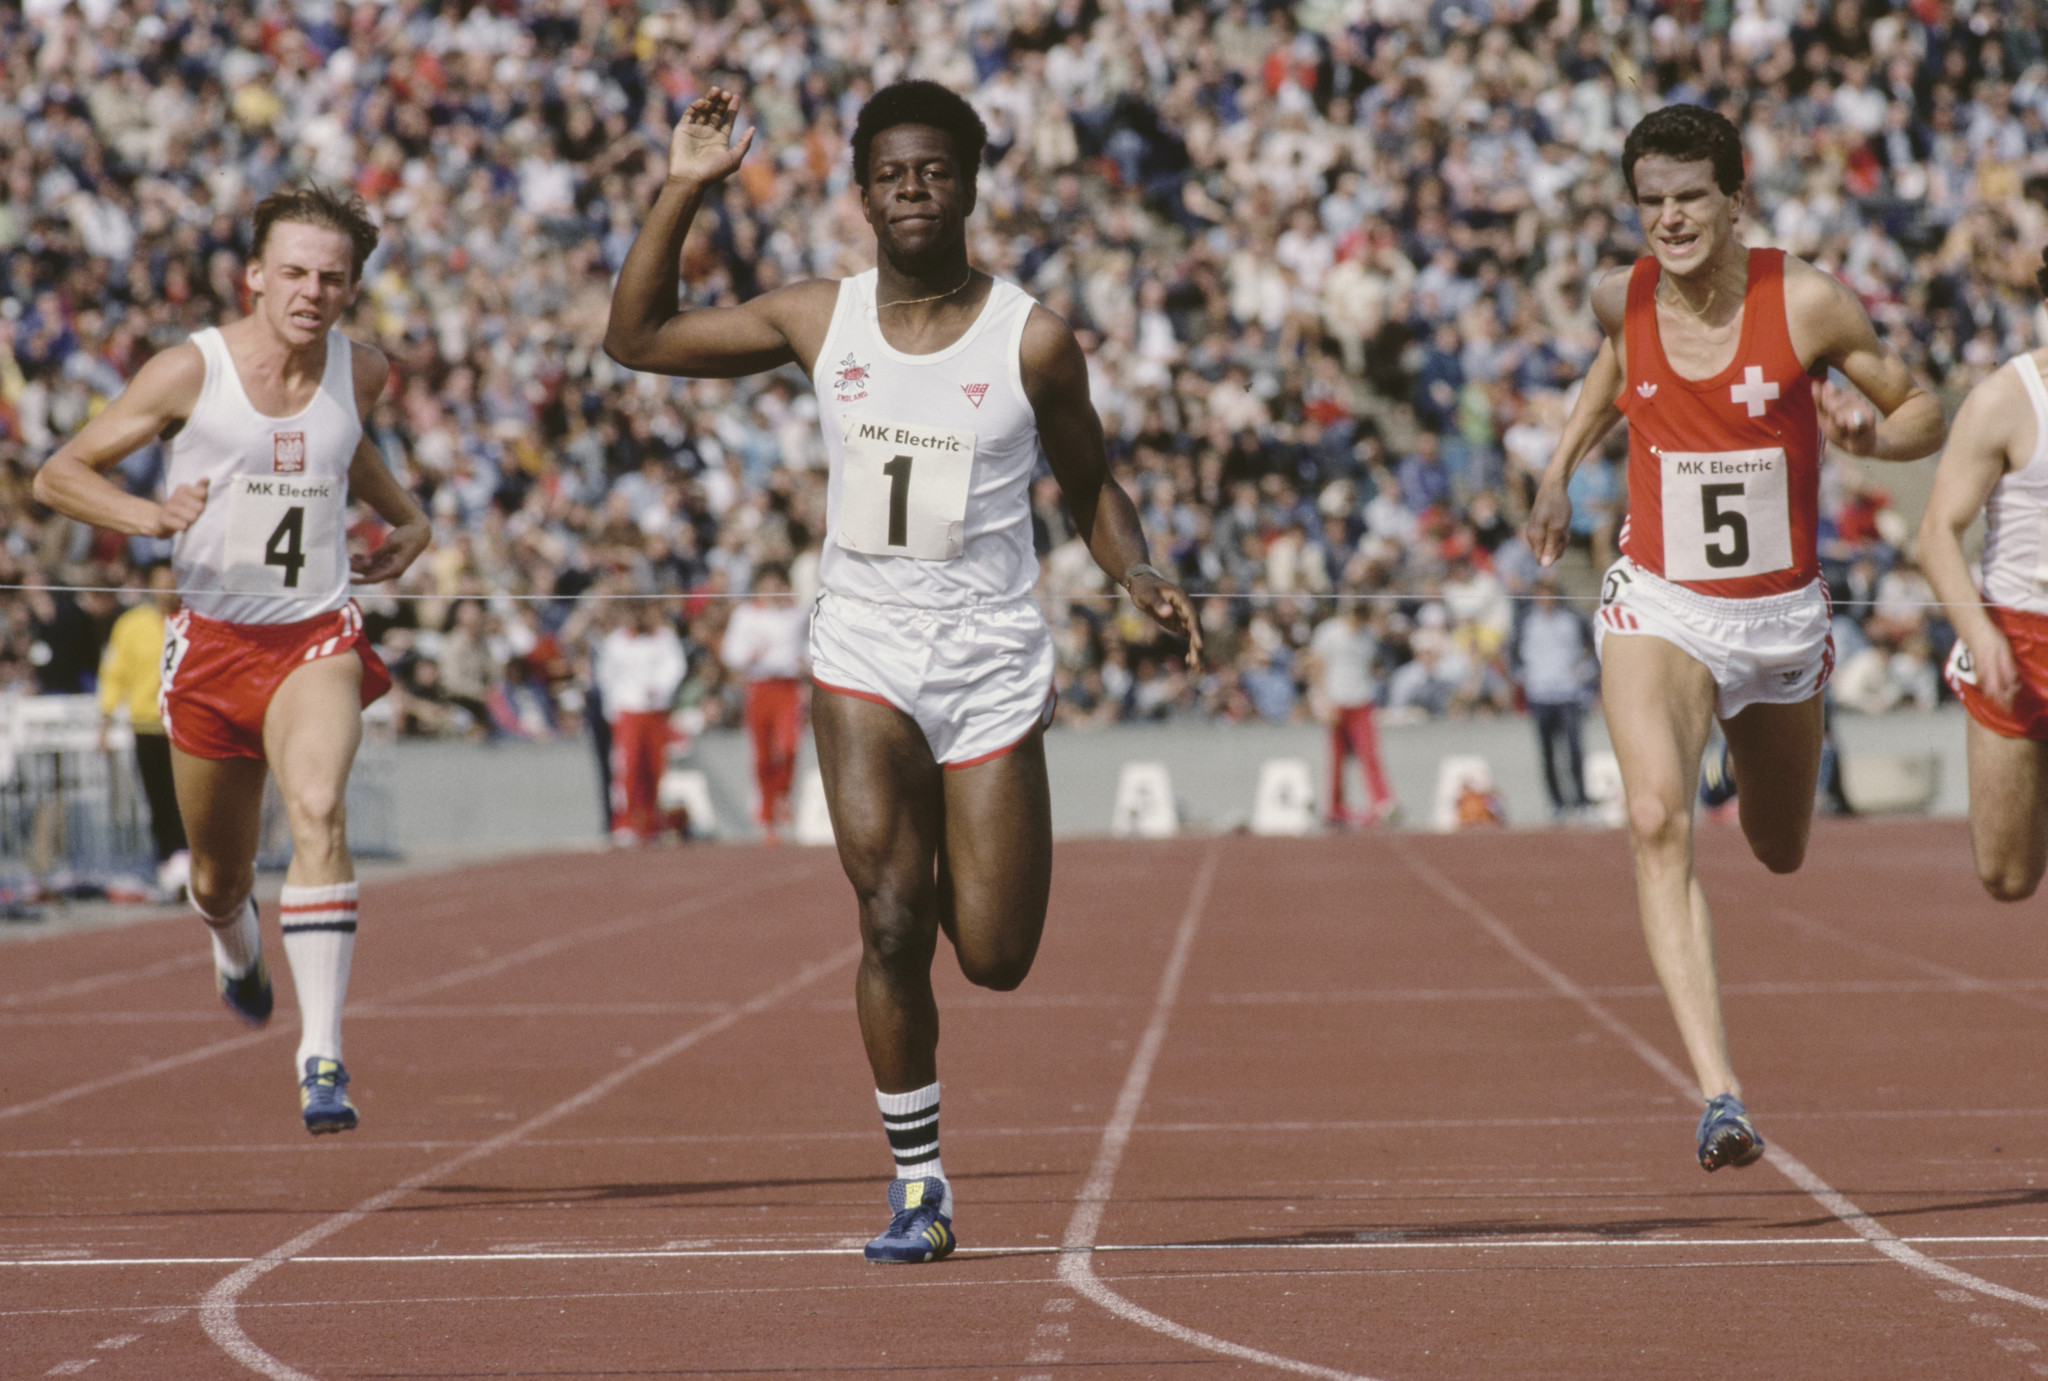 Tributes pour in for British sprinter McFarlane - Olympic silver medallist and joint Commonwealth champion